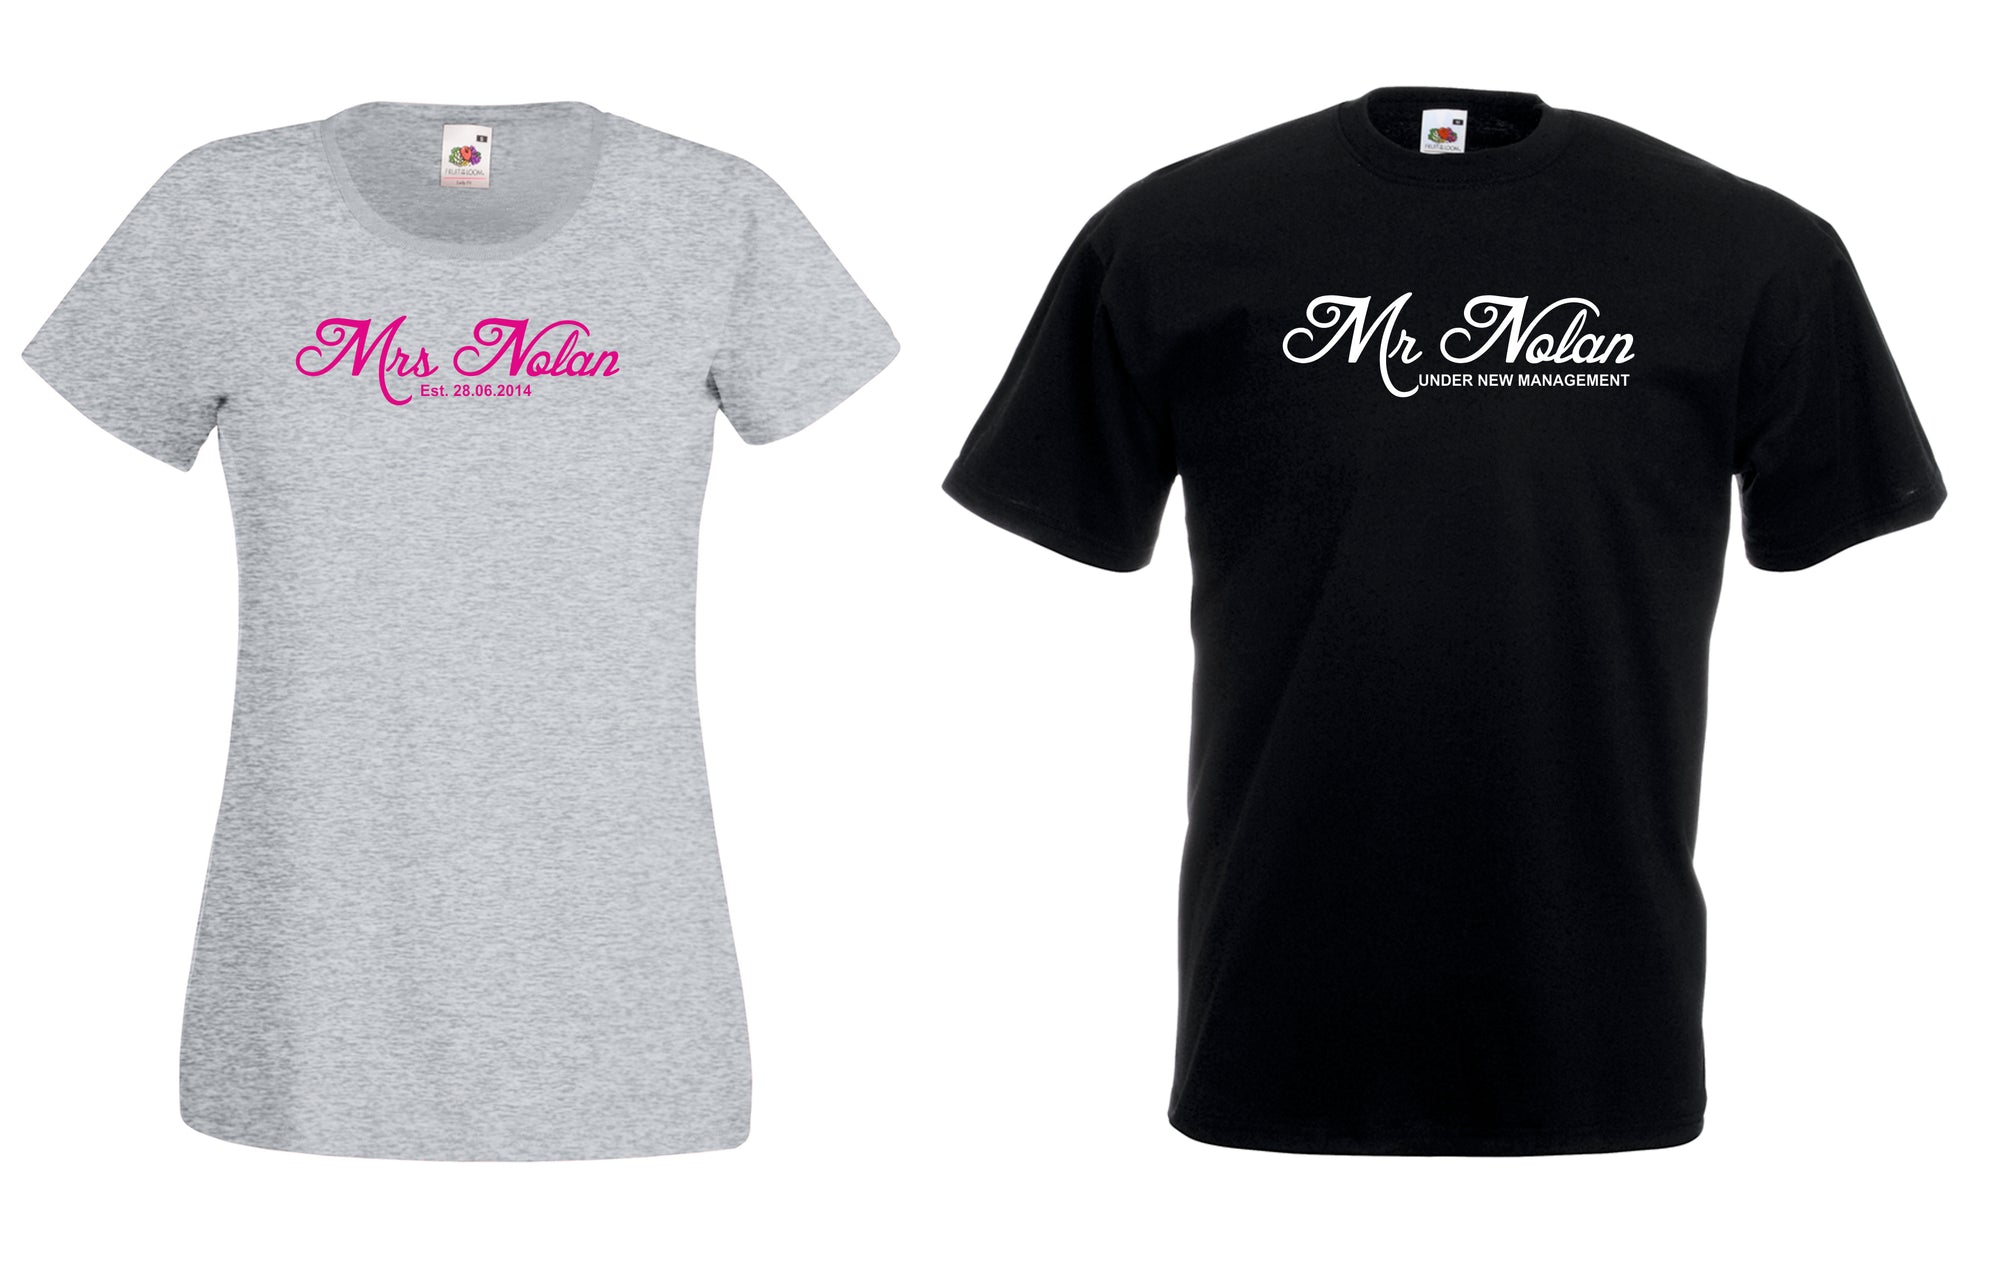 Morning After the Wedding T-Shirts, Personalised gift